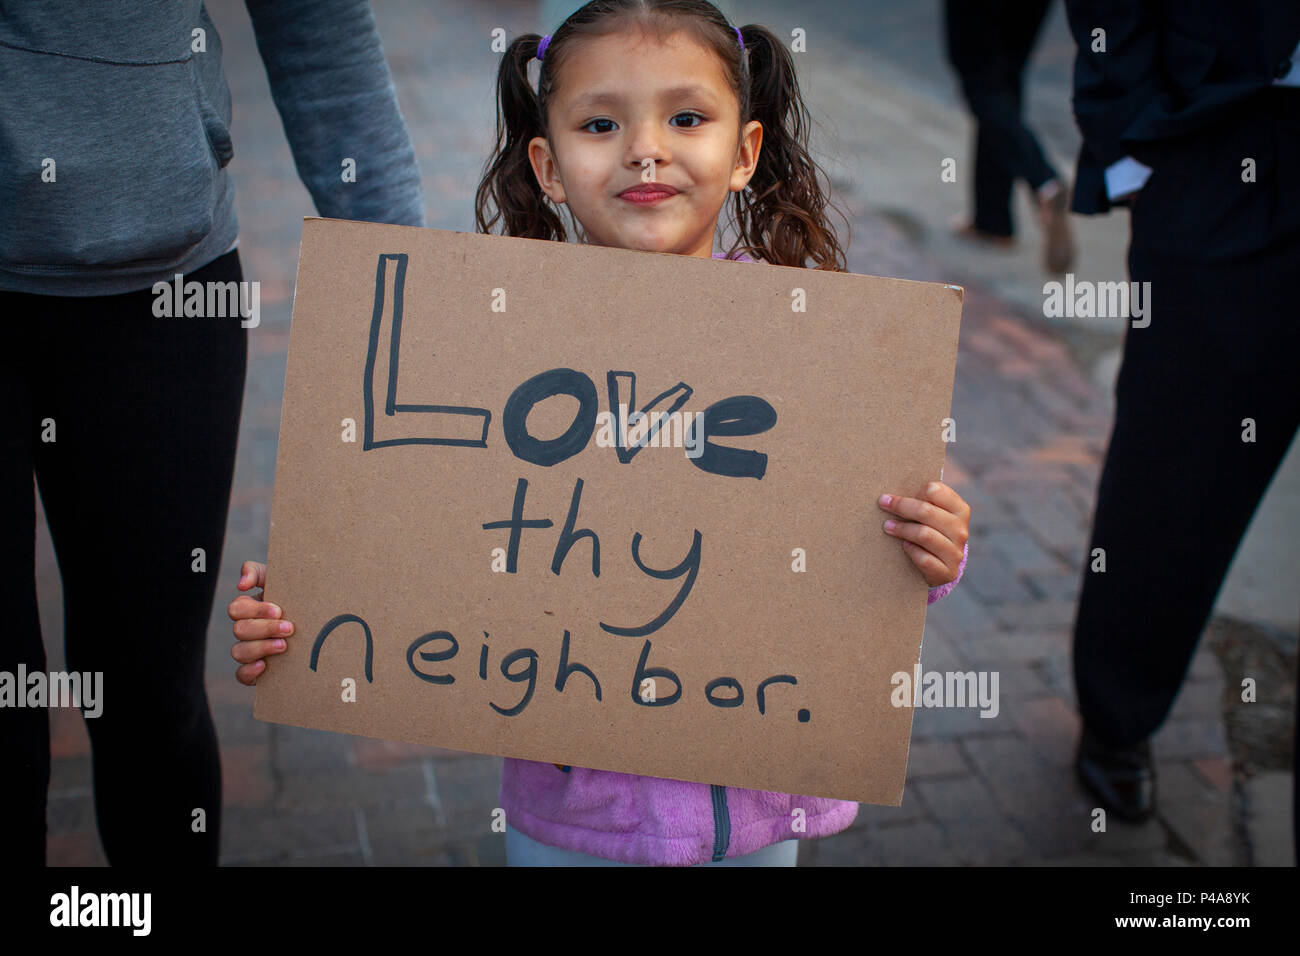 DULUTH, MINNESOTA, USA - June 20, 2018: A little girl protester holds up her sign 'Love thy Neighbor' while President Donald Trump speaks at a rally Wednesday night. Credit: Theresa Scarbrough/Alamy Live News Stock Photo